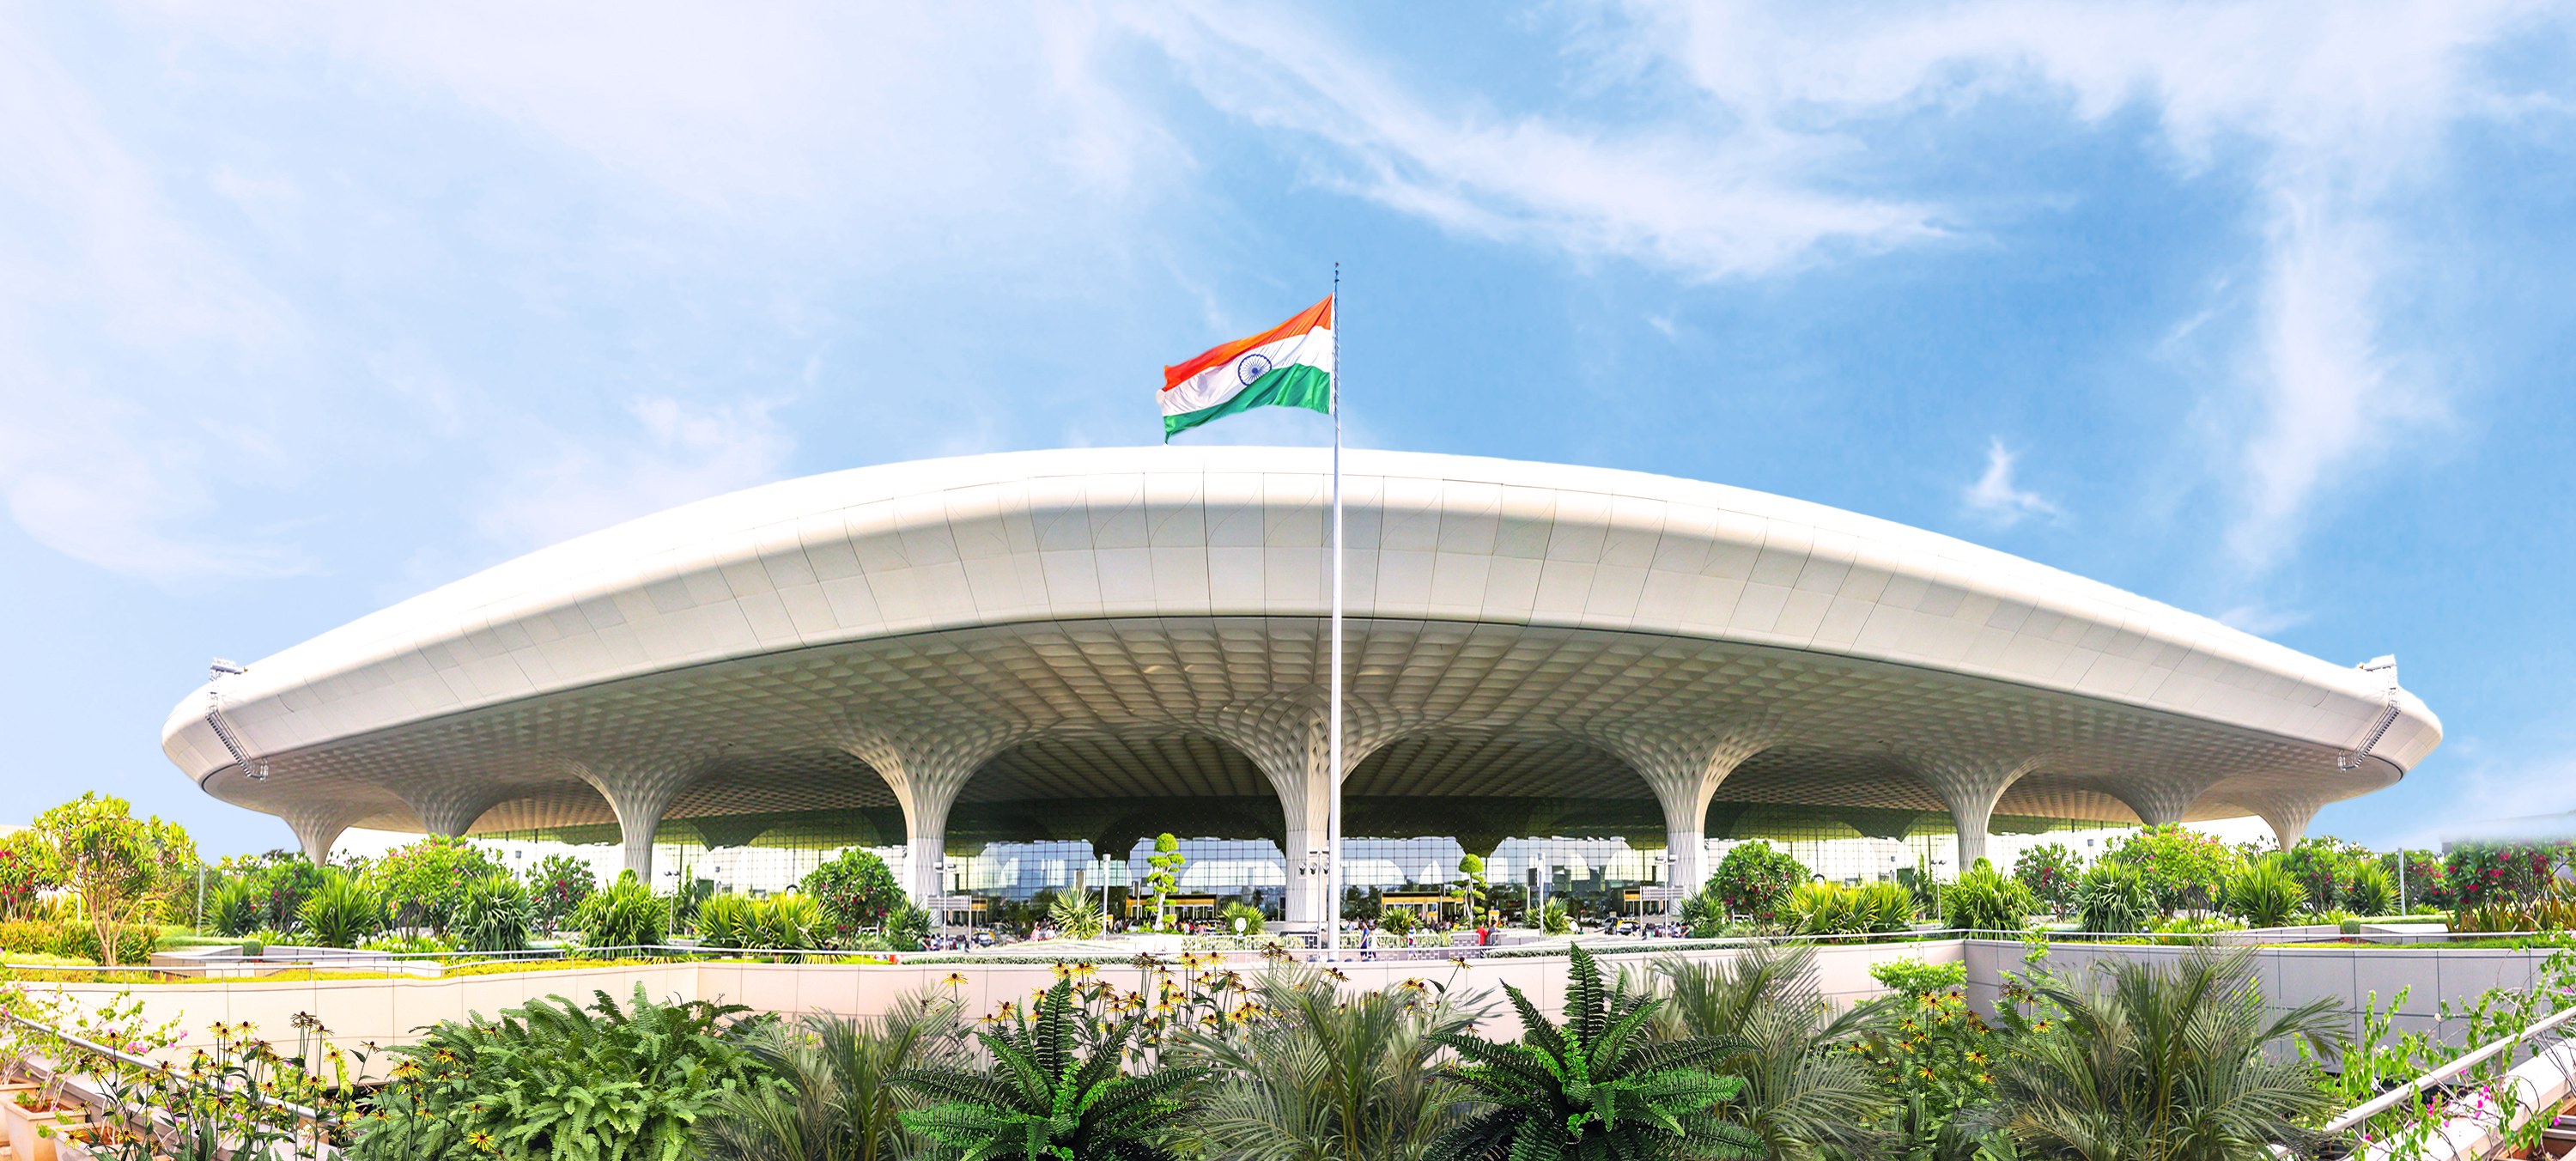 Mumbai’s CSMIA launches India’s first Domestic to Domestic Passenger Transfer Facility at T2